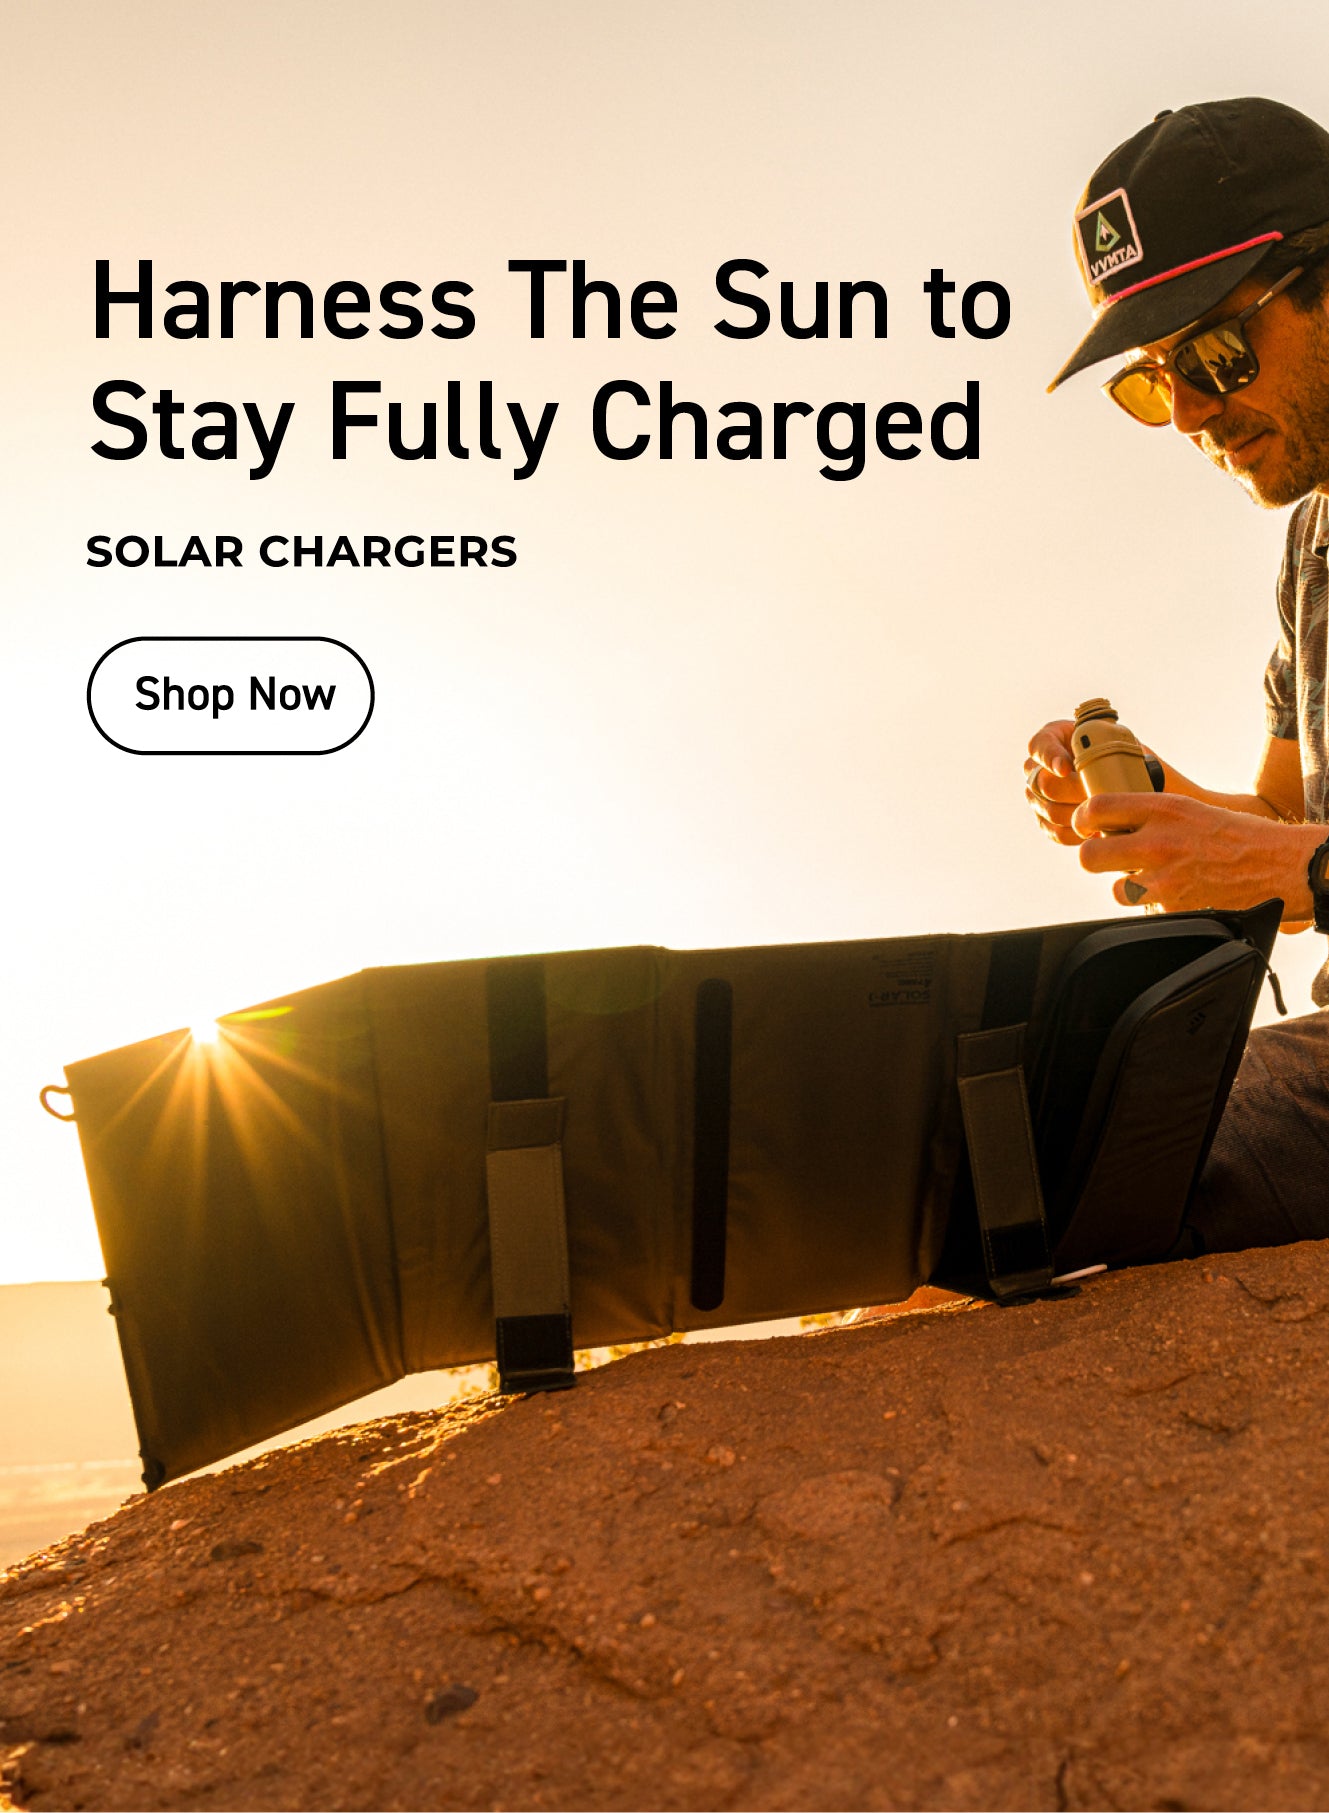 harness the power of the sun to stay fully charged - shop nestout portable solar chargers